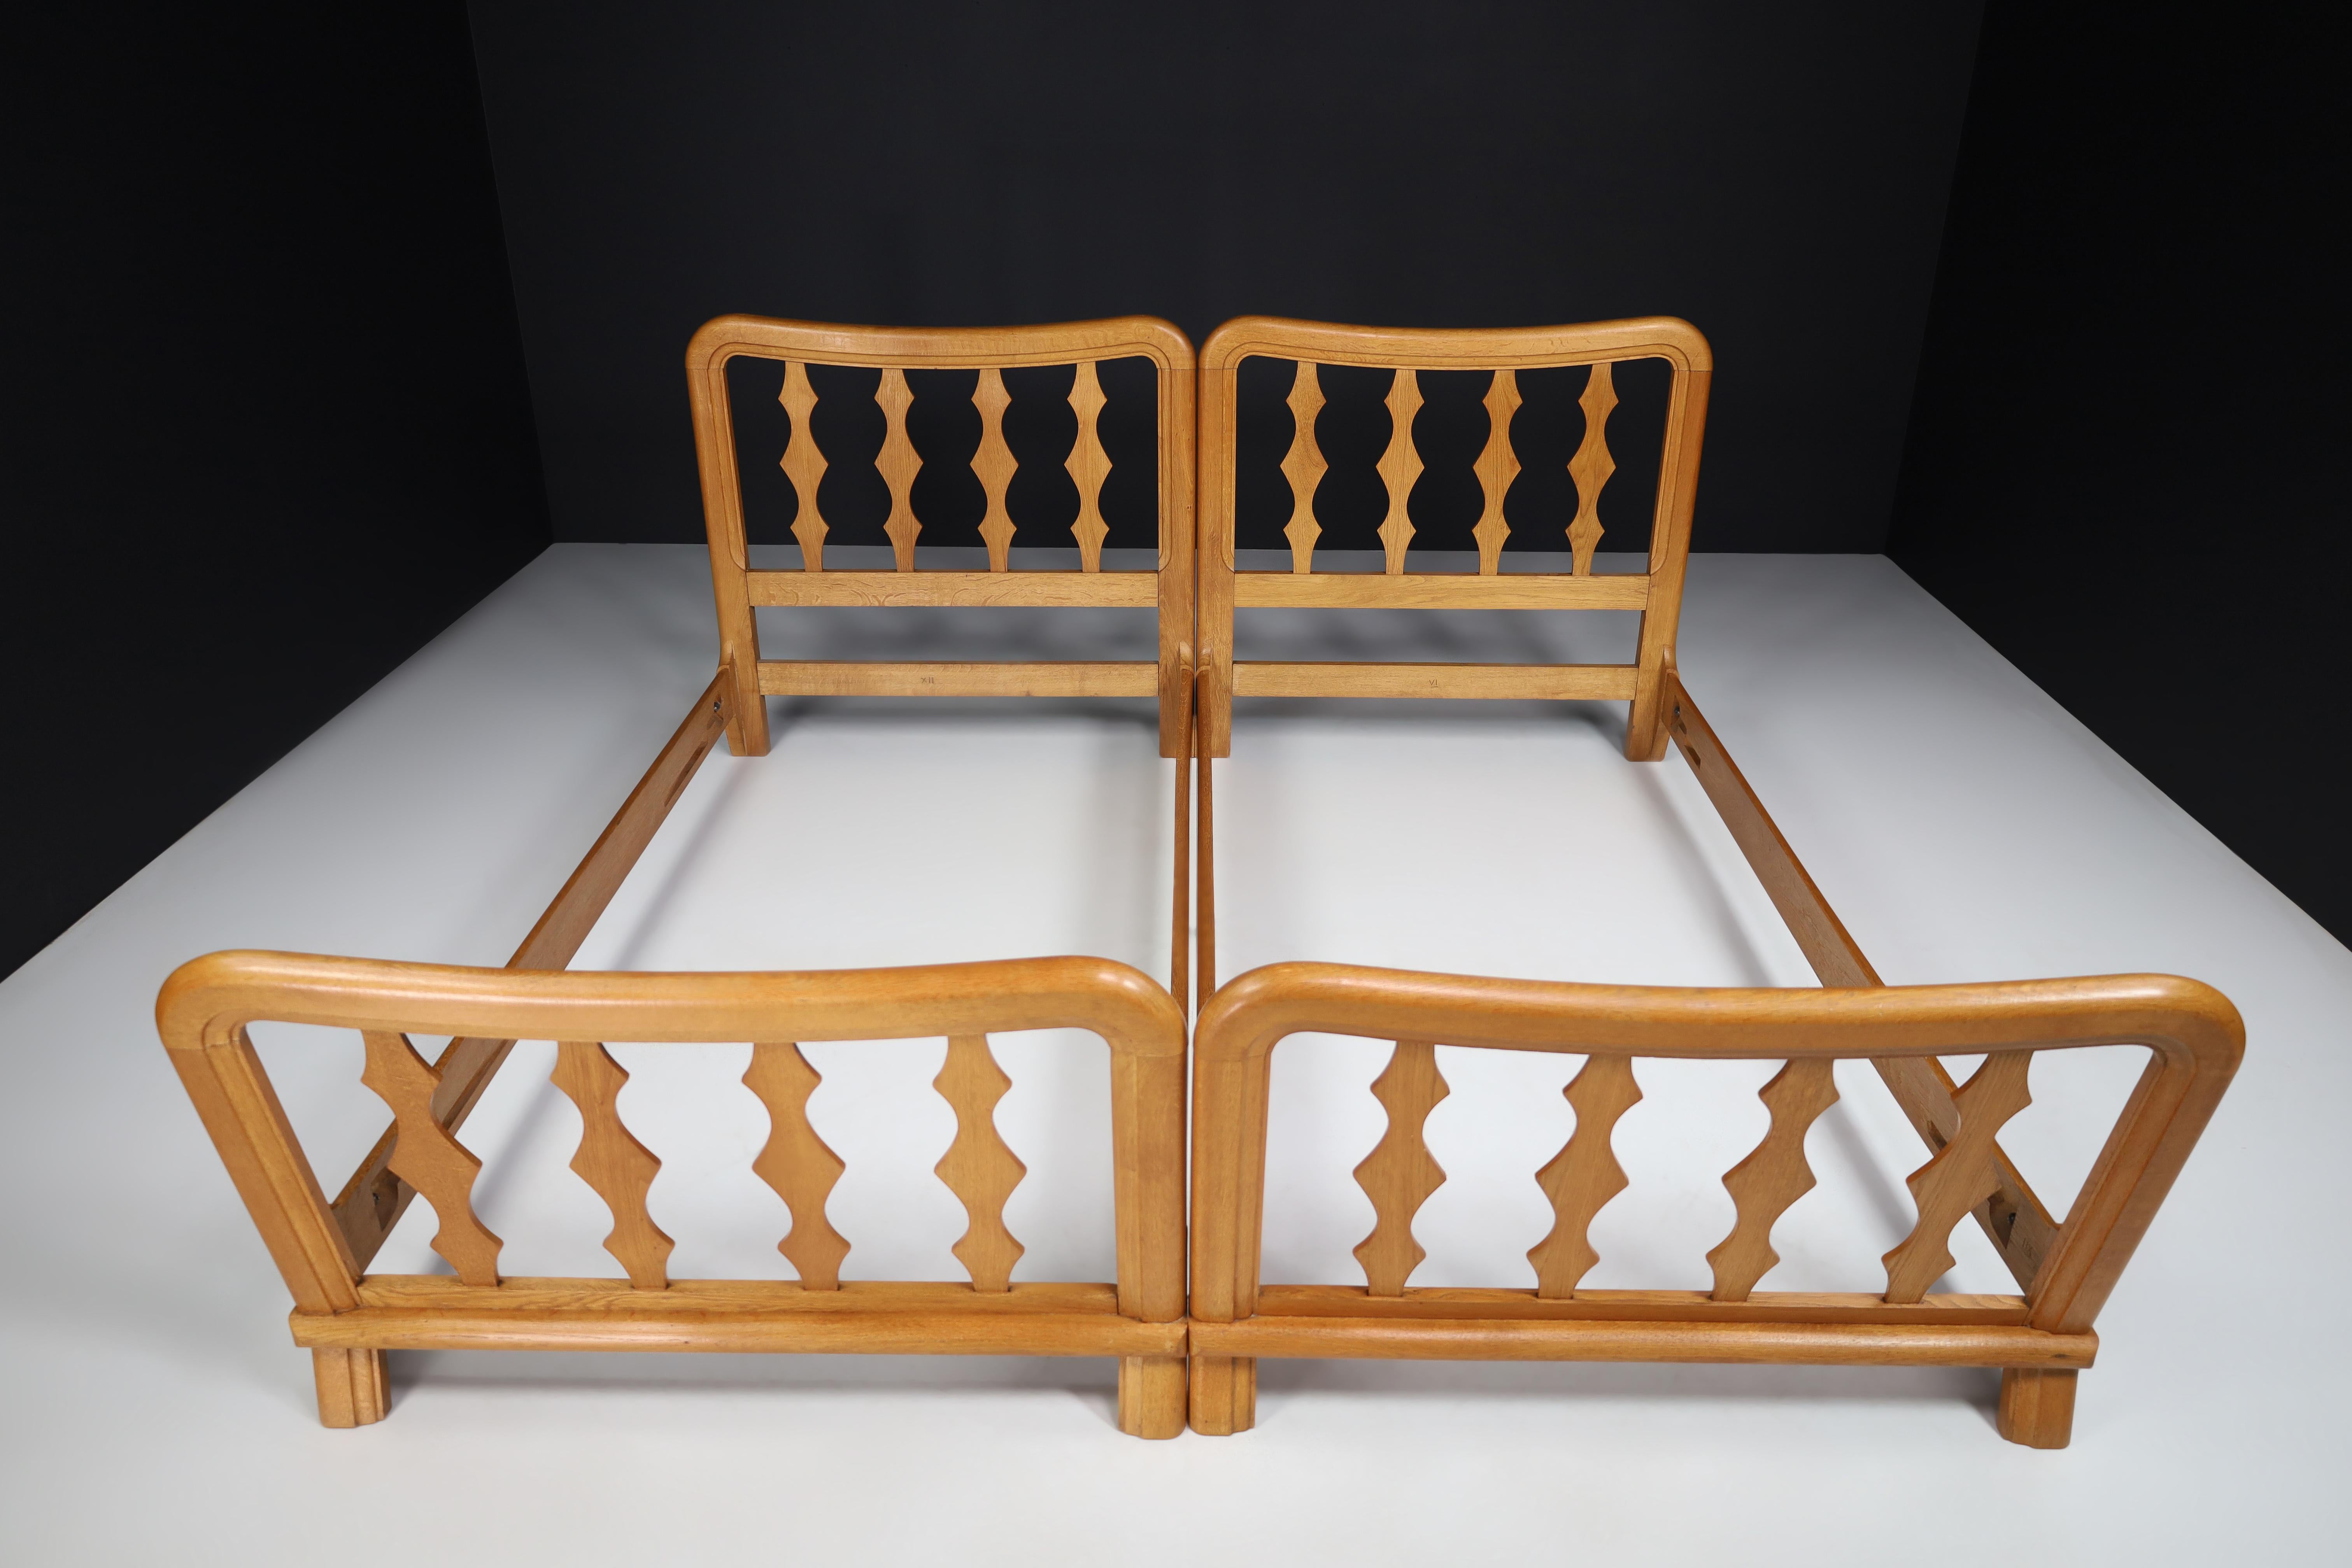 French Mid-Century Modern Guillerme & Chambron Bed Frames in Blond Oak, France 1960s For Sale